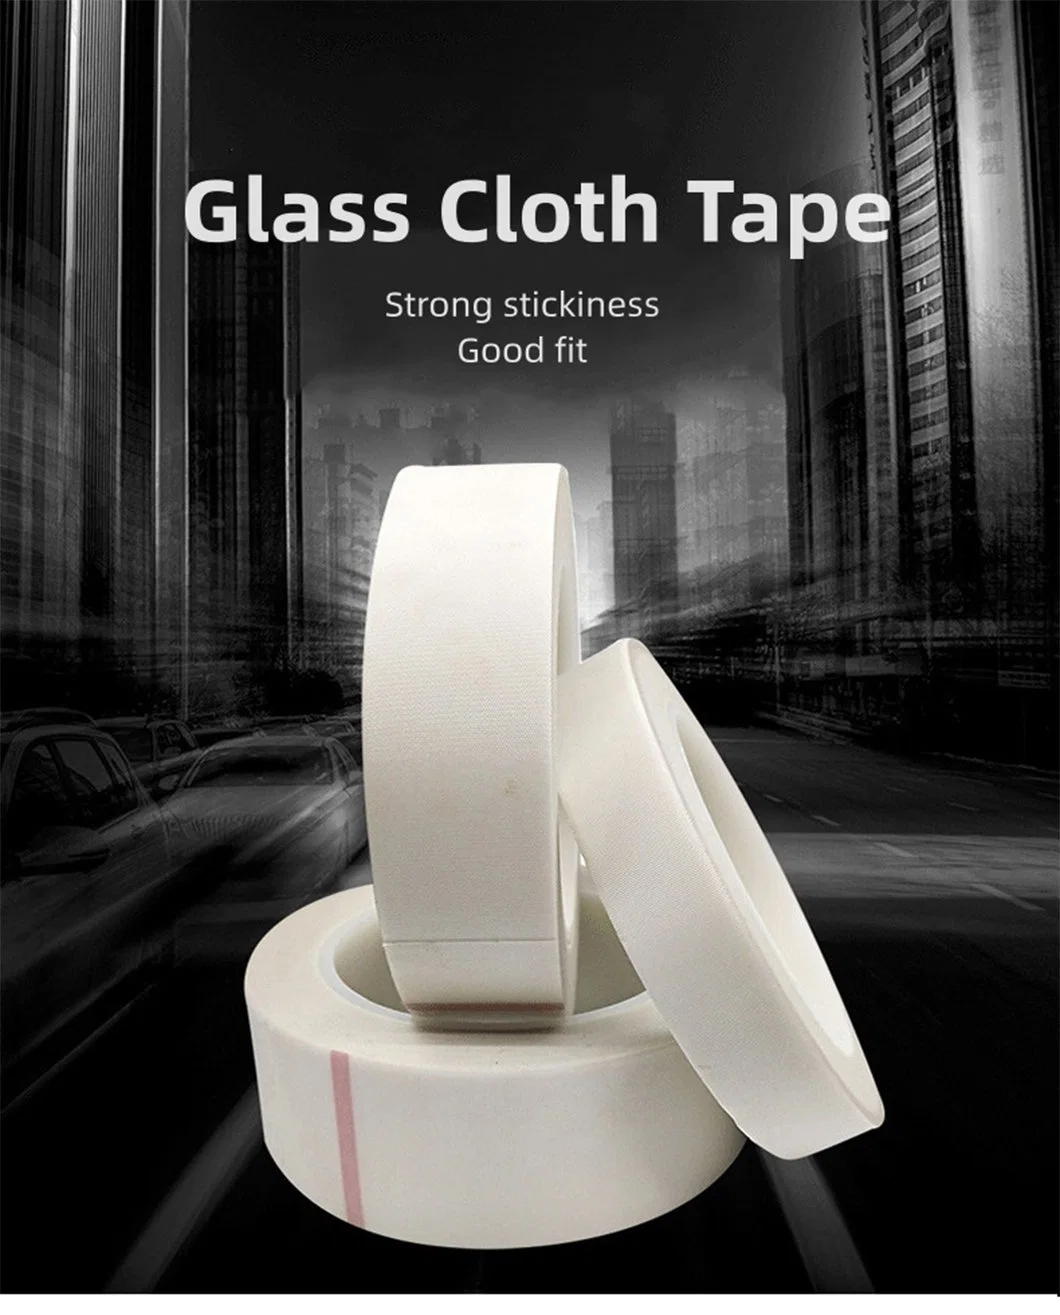 High Tensile Strength Adhesive Cross-Weaved Fiber Glass Reinforced Filament Packing Tape